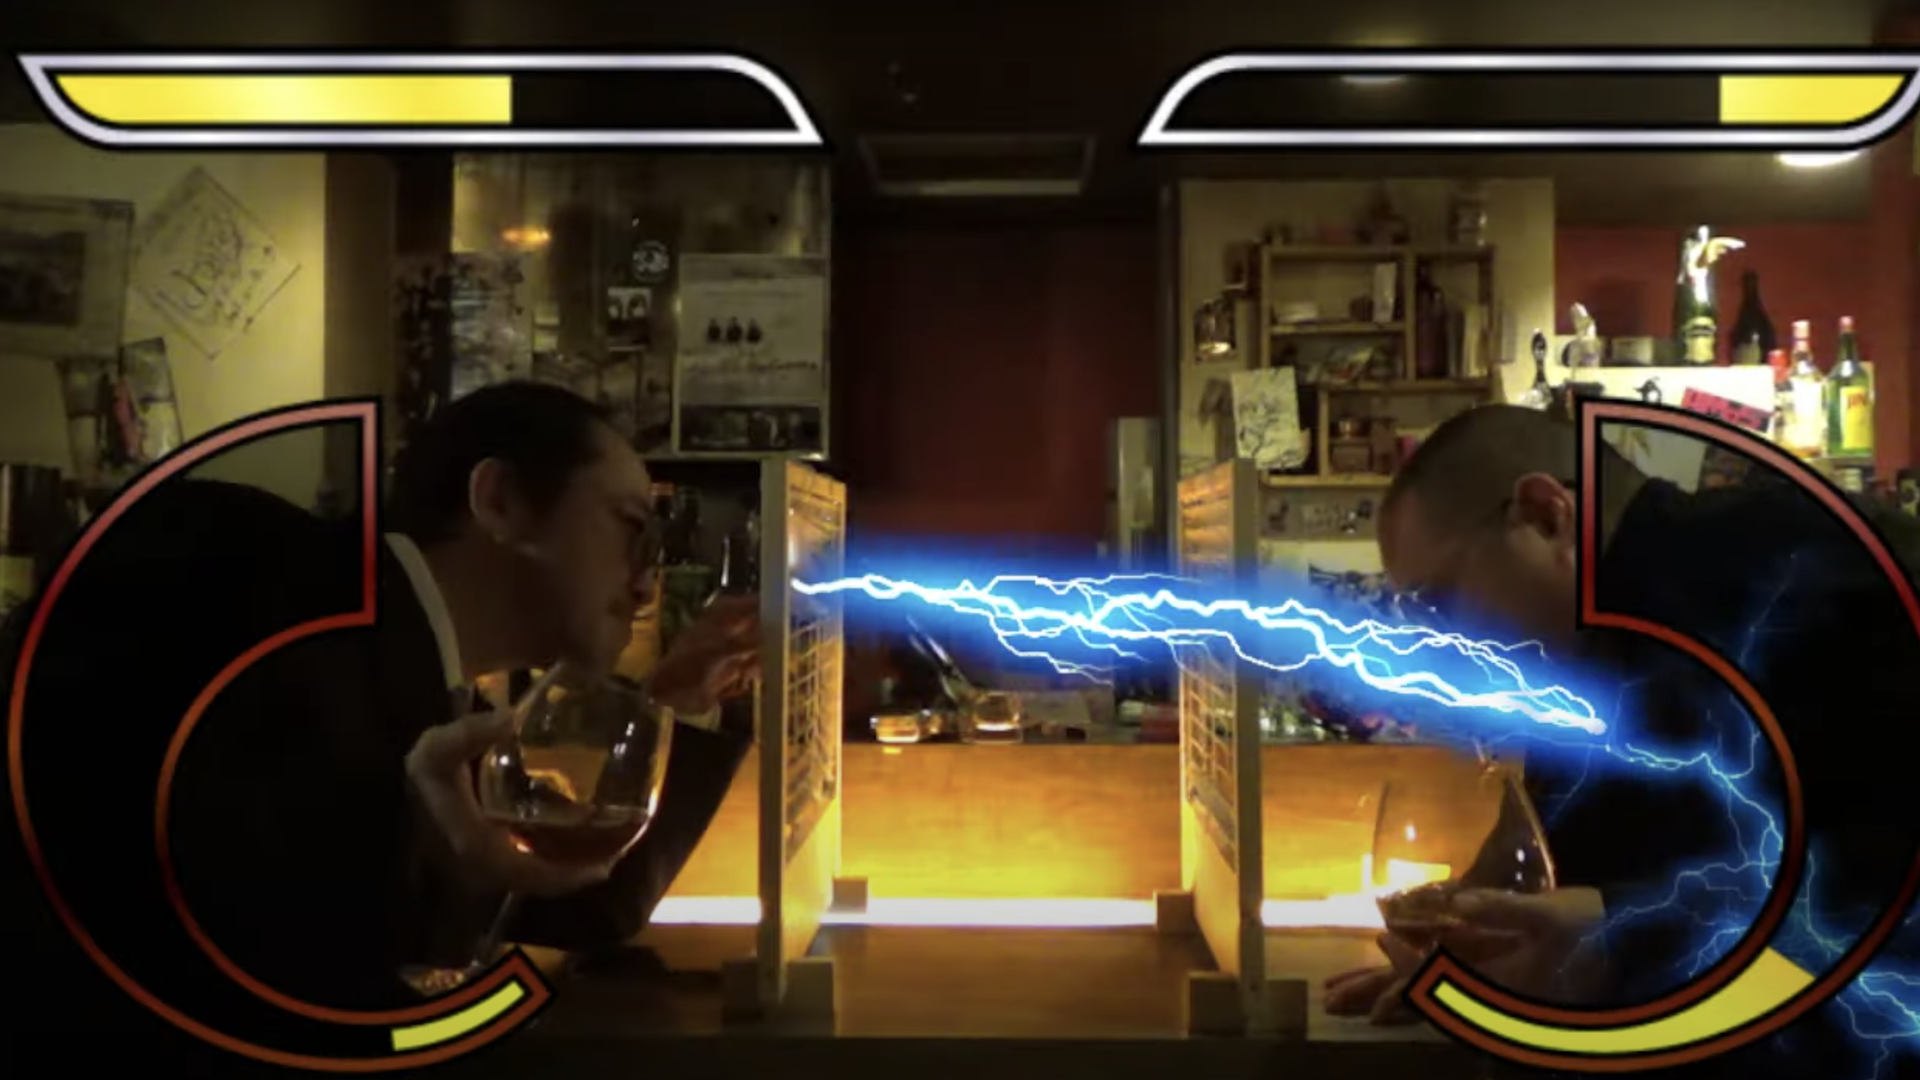 Video still of two people facing off in a bar, drinks in hand, as one seems to shoot electricity through some blinds, at the other